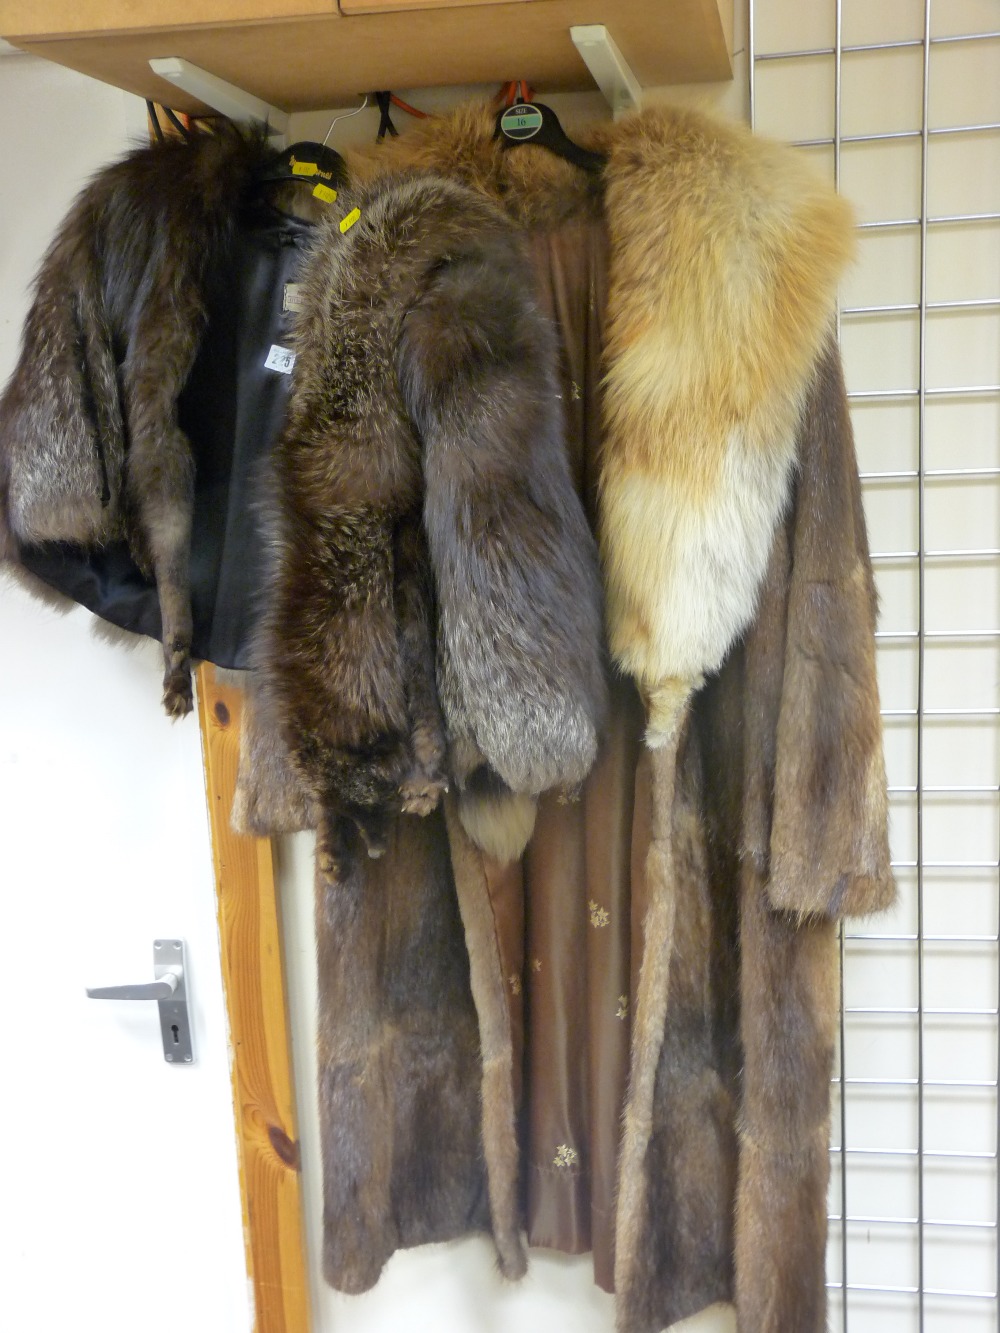 Lady's fur coat, fur jacket and stole and another stole